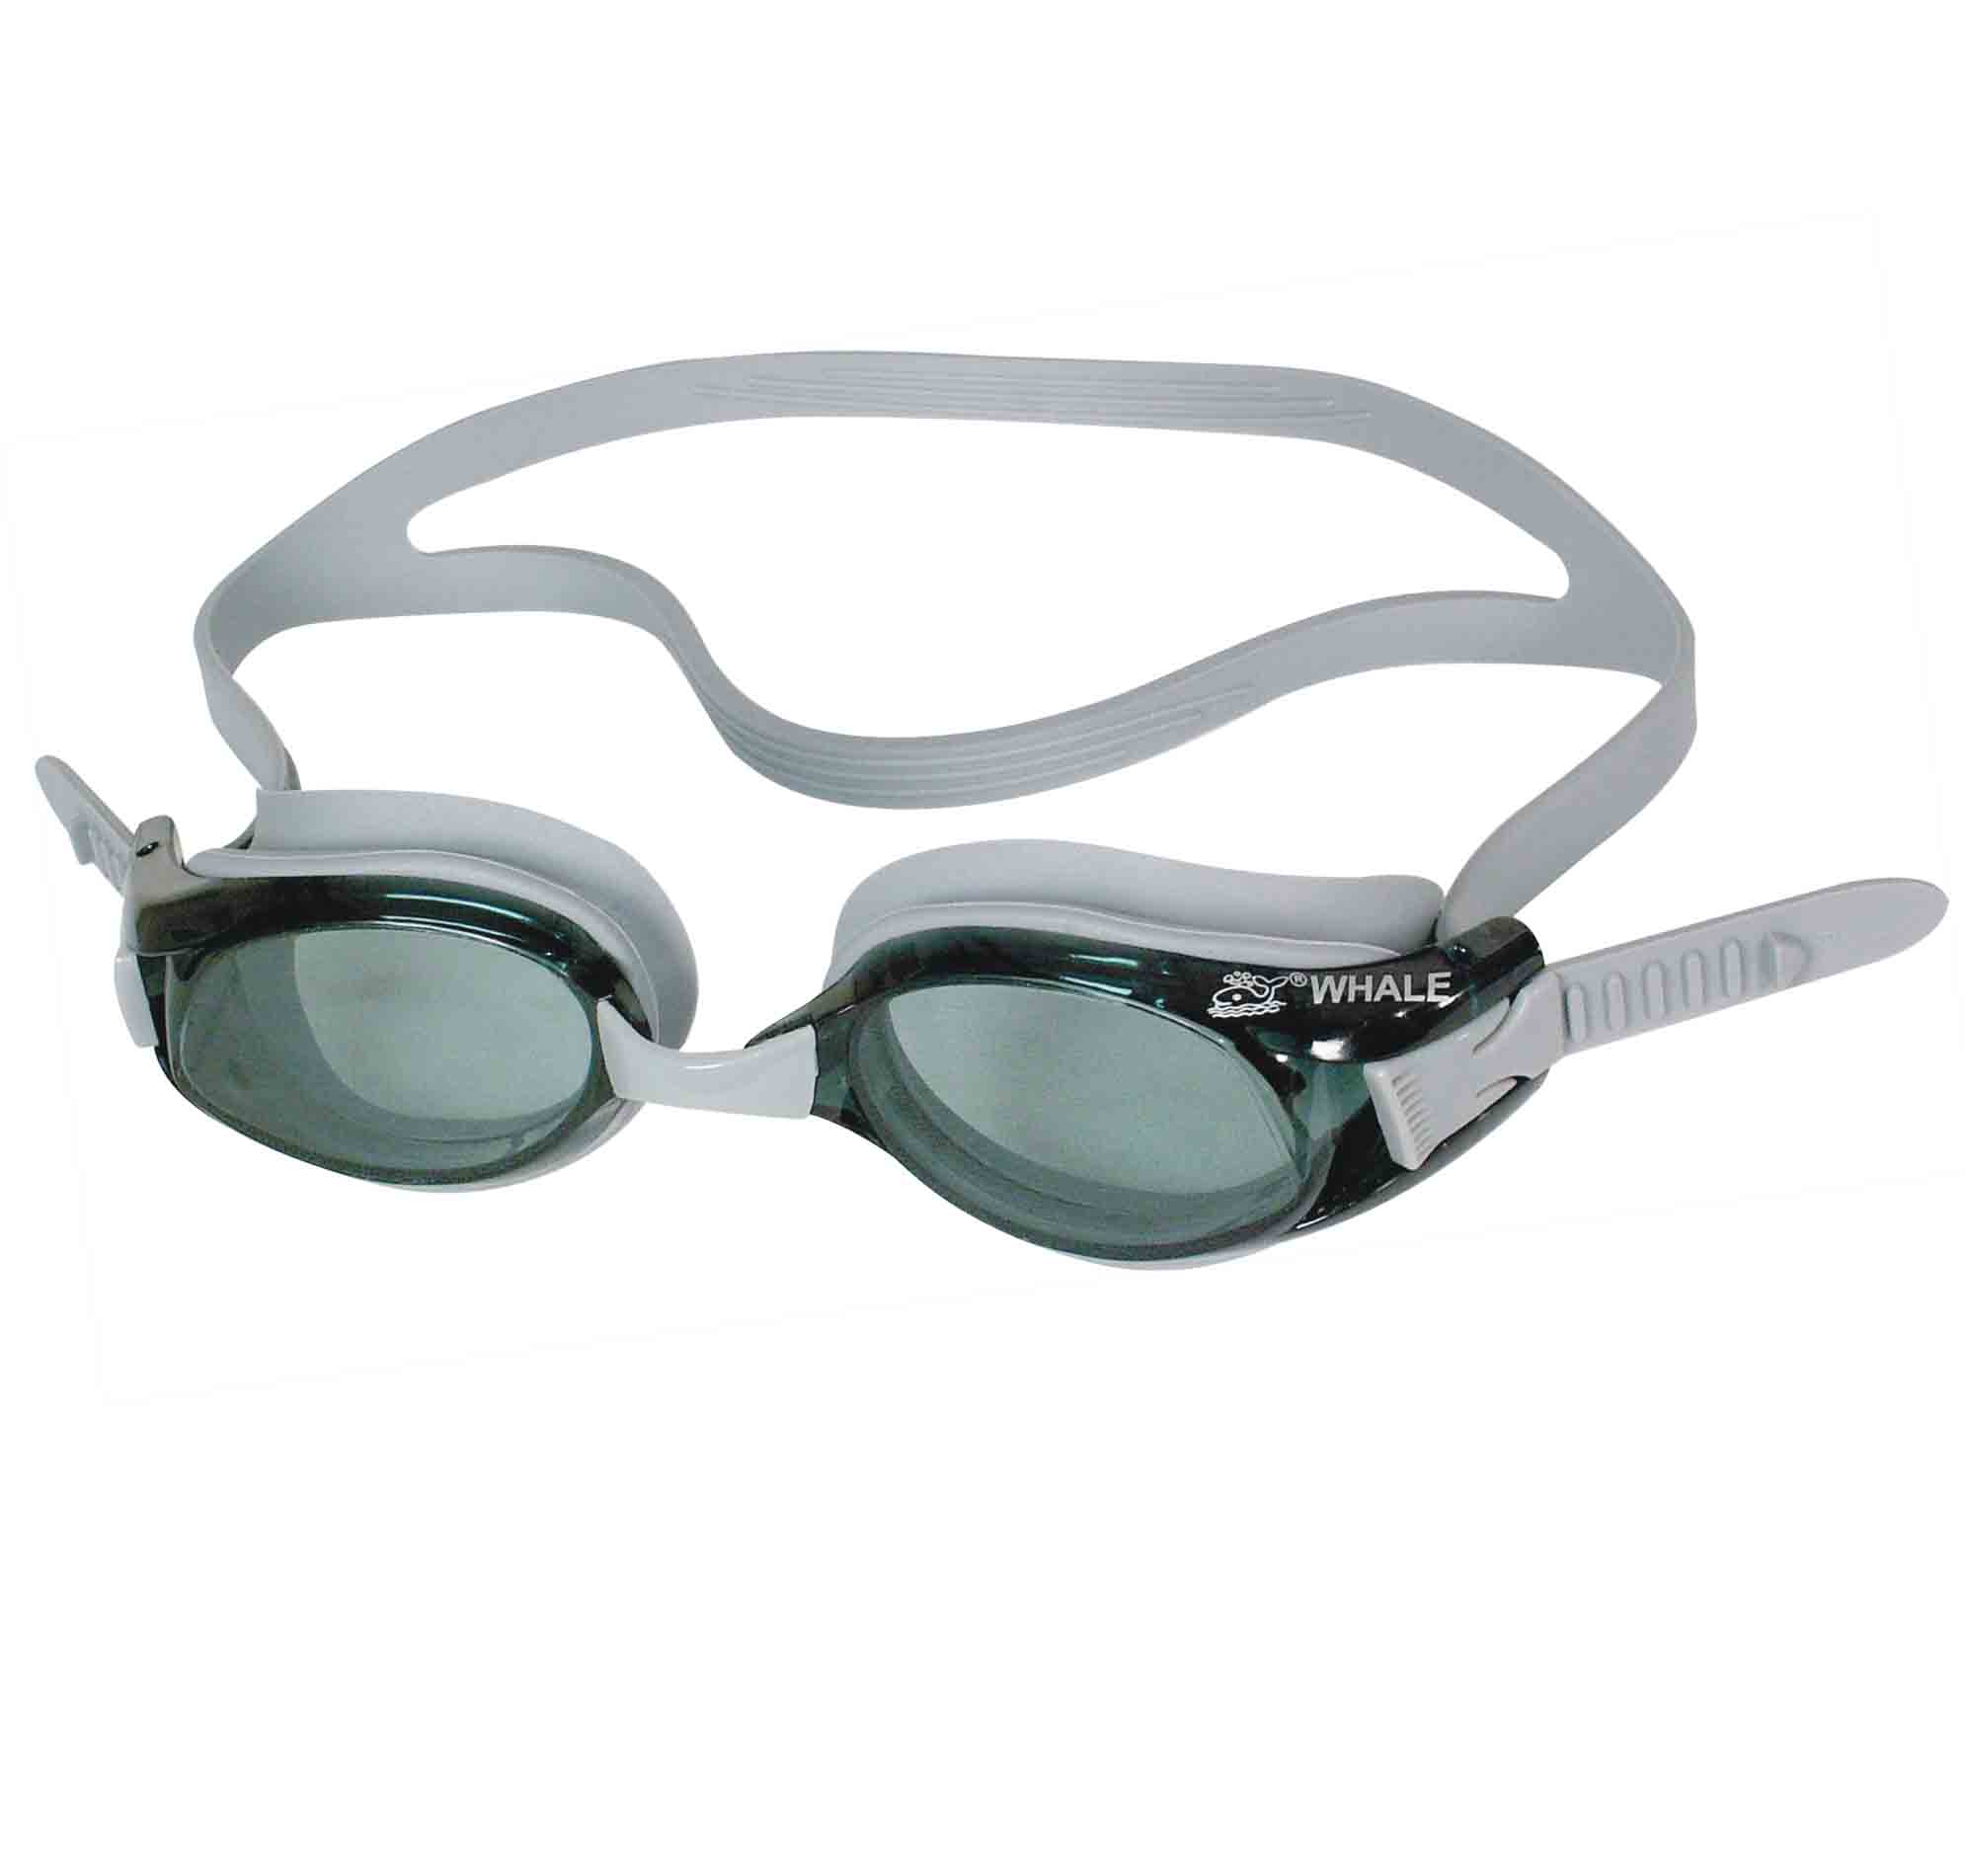  Swim Goggles, Caps And Other Accessories (Schwimmbrille, Kappen und andere Accessoires)